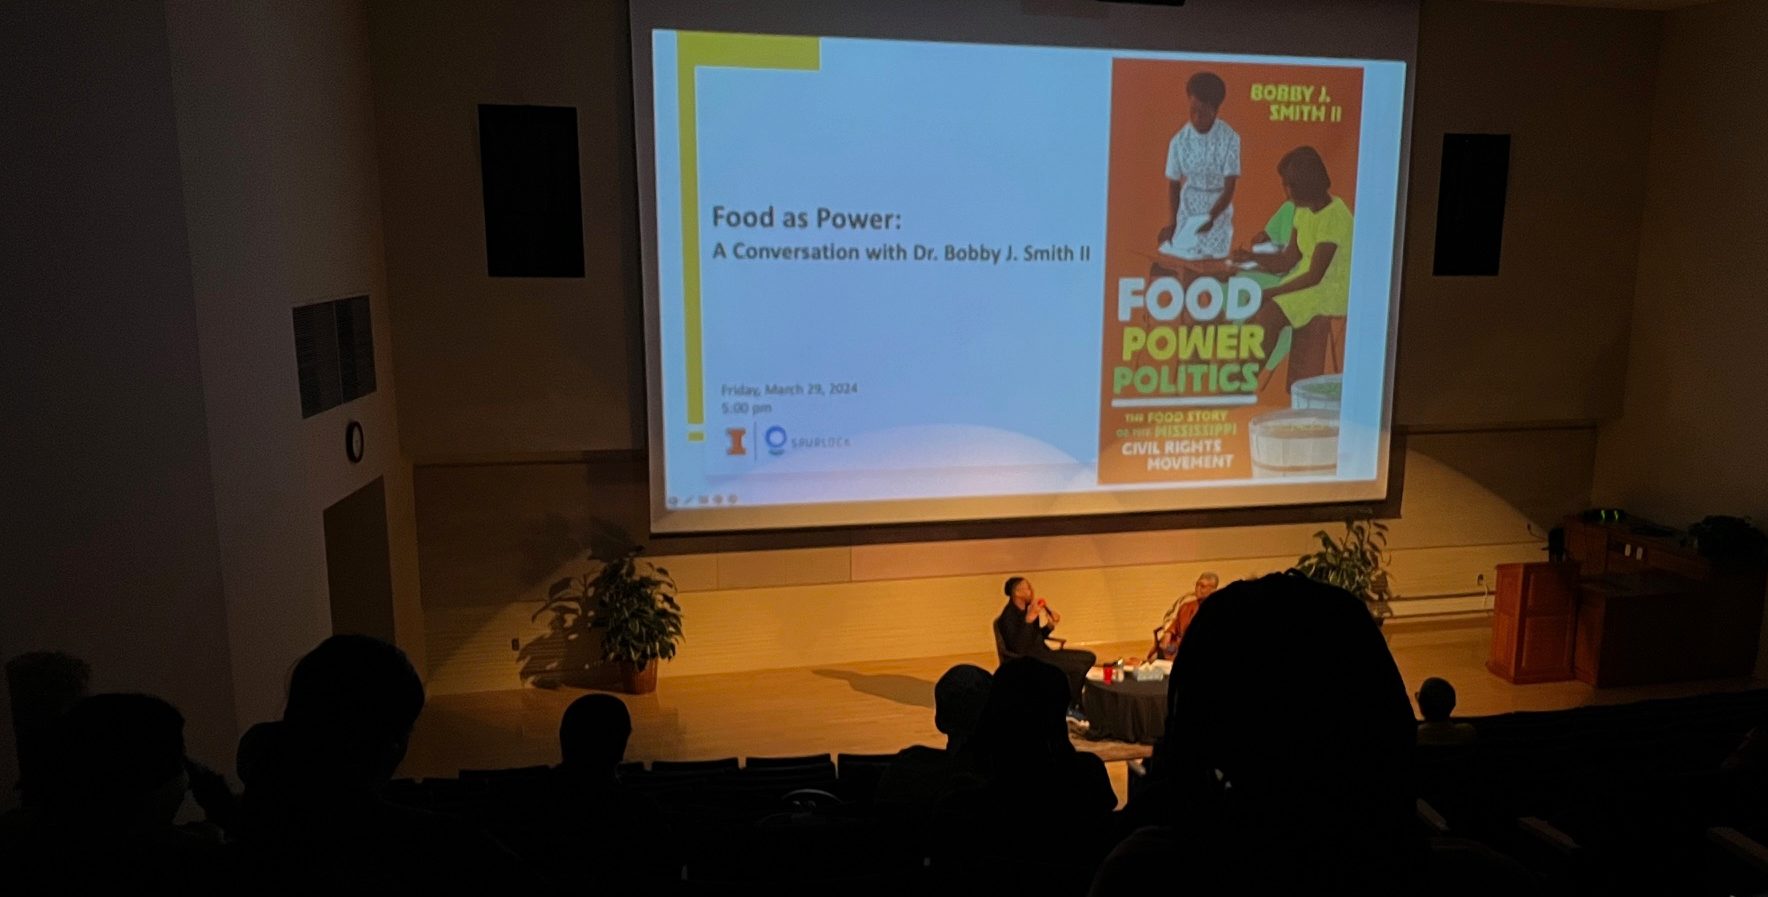 A conversation with  Food Power Politics  author Dr. Bobby J. Smith II